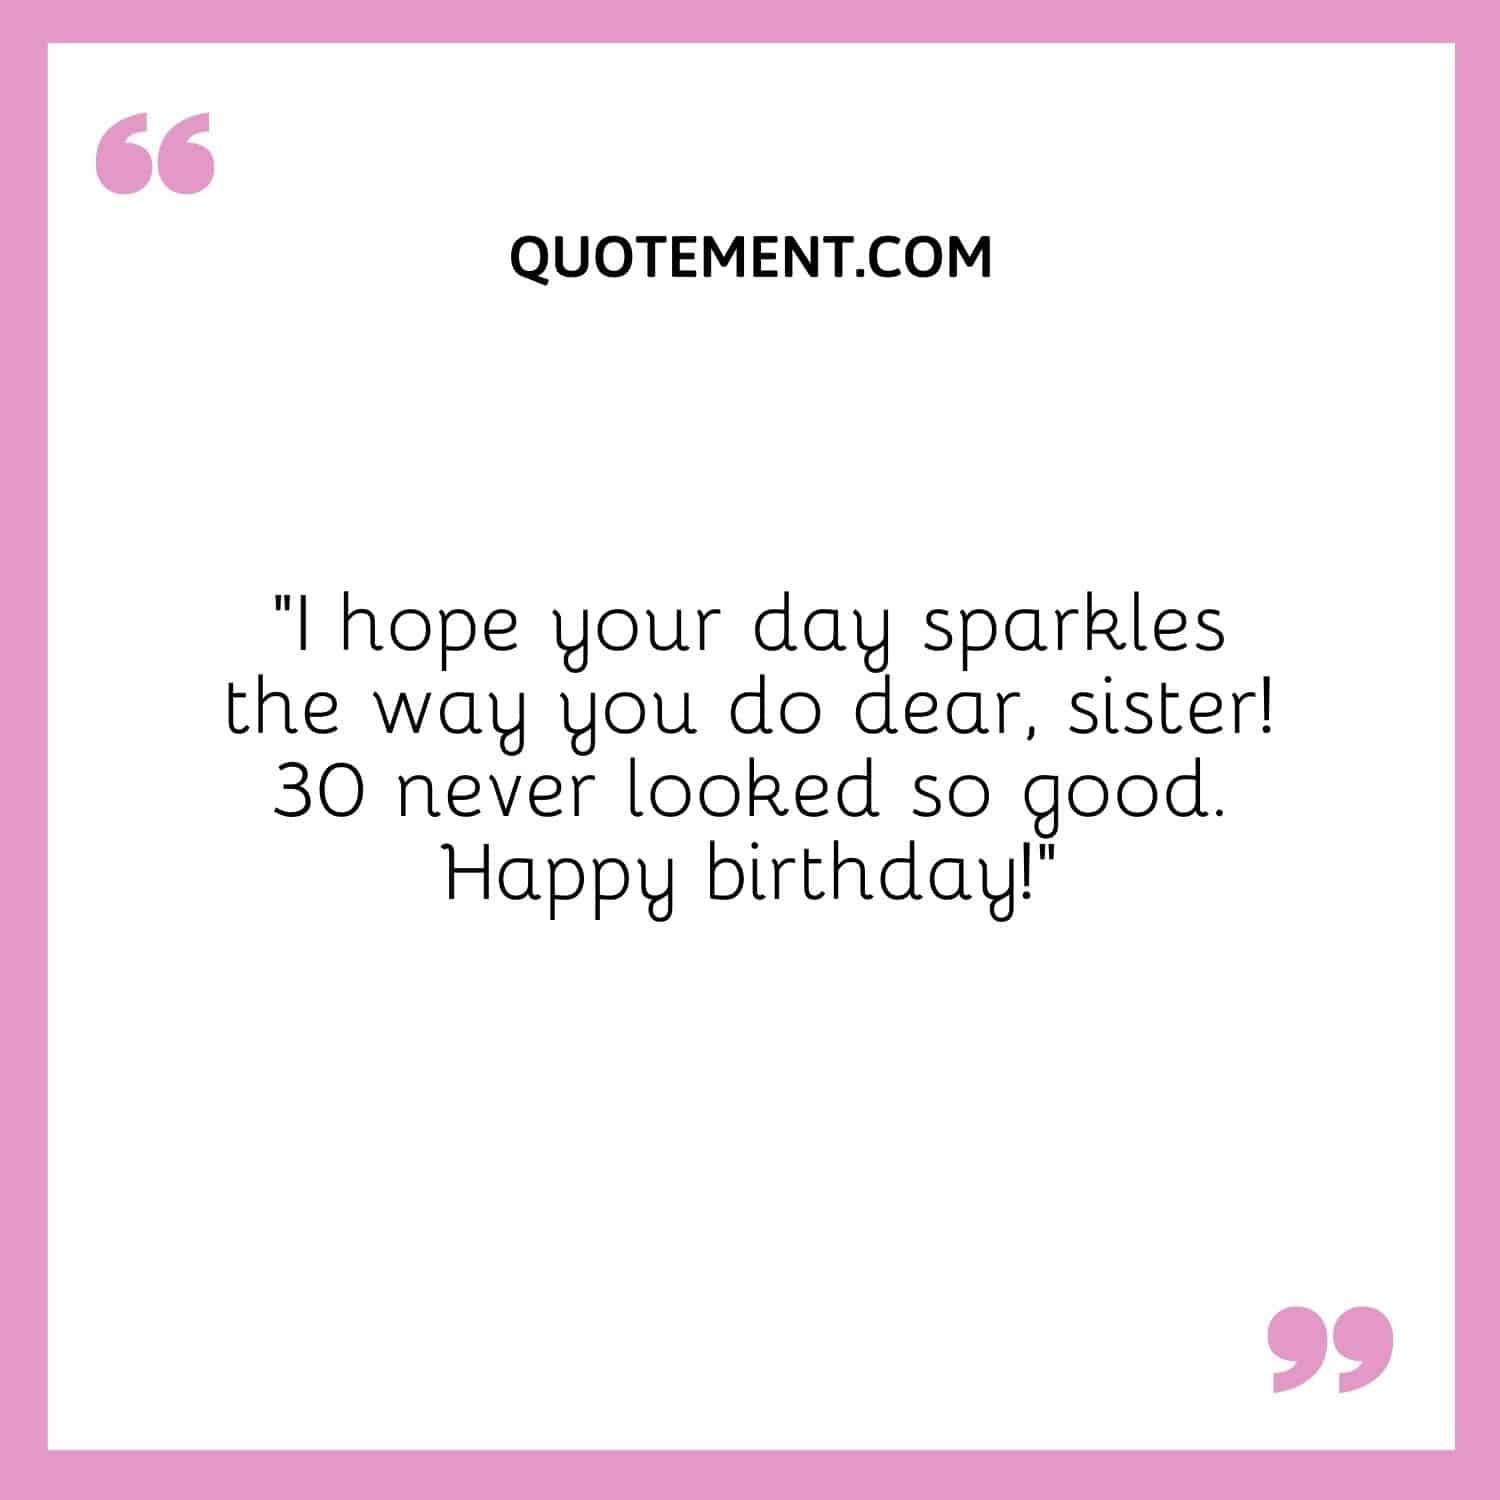 “I hope your day sparkles the way you do dear, sister! 30 never looked so good. Happy birthday!”